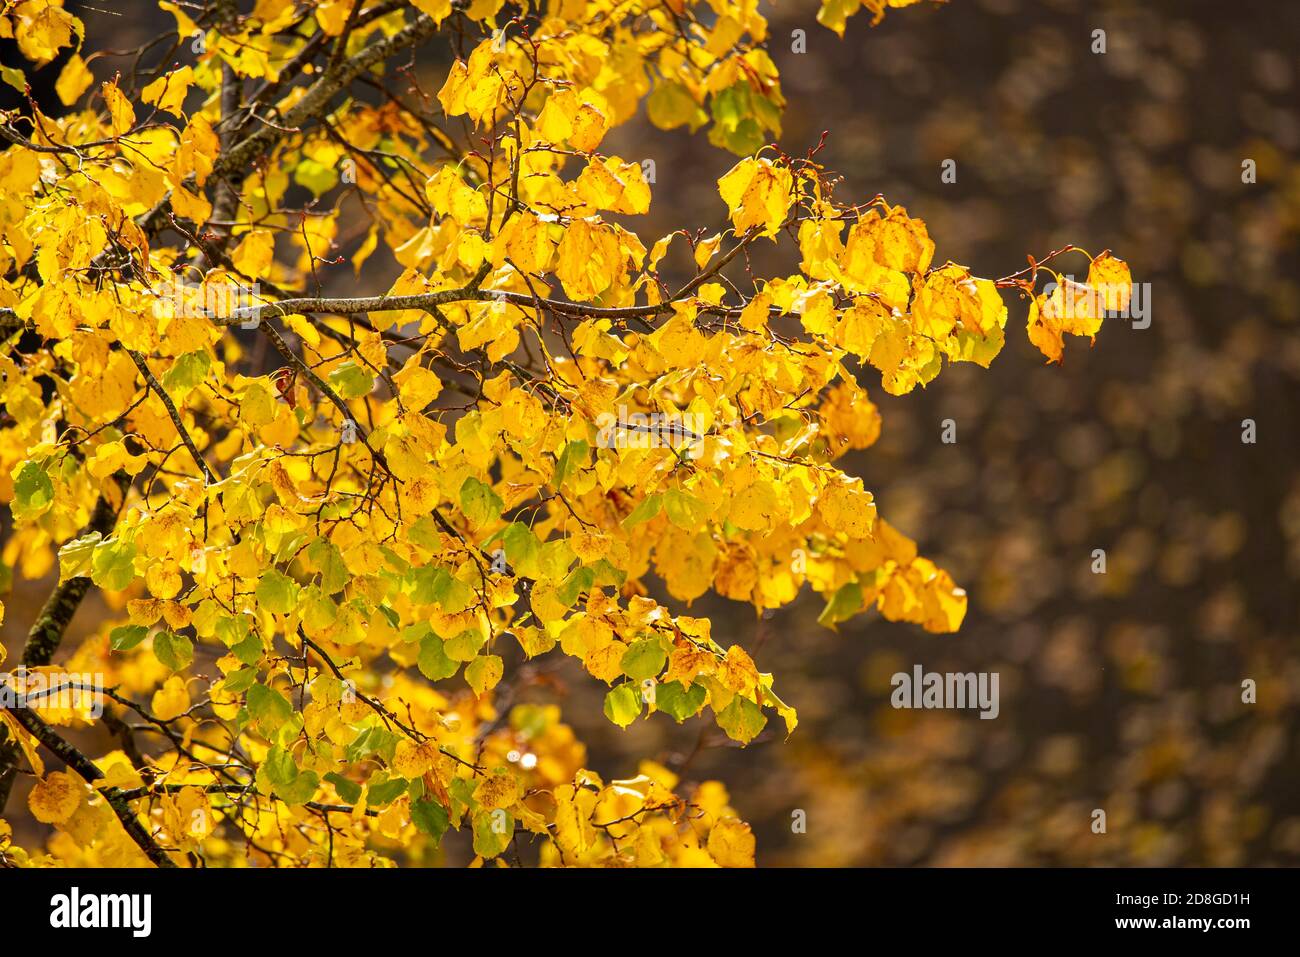 Close-up of tree branches with bright yellow autumn leaves Stock Photo